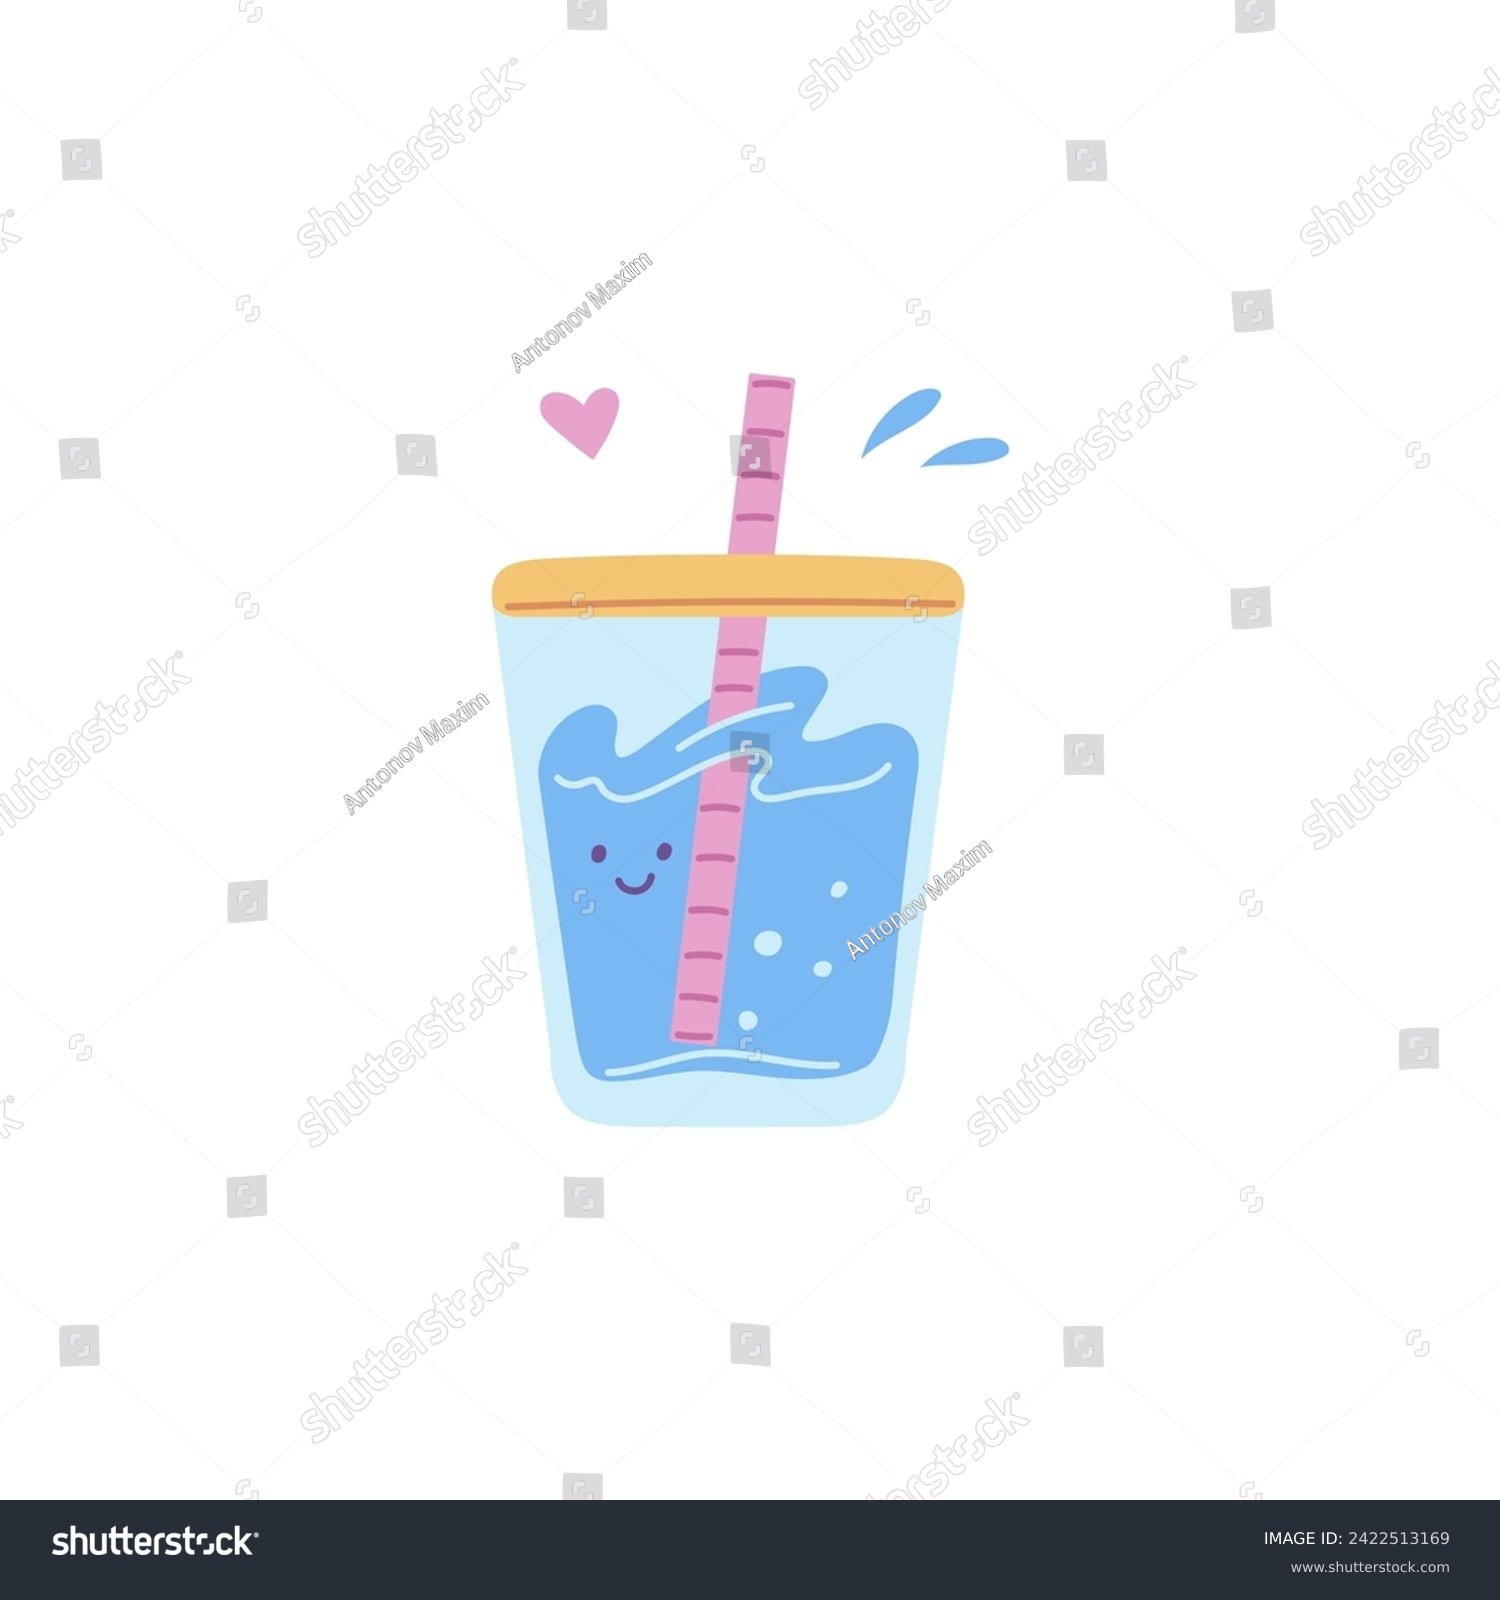 SVG of Cute cocktail glass with water. A whimsical illustration of a cocktail glass character. Drinking water in a glass glass with a cocktail stick. Isolated flat illustration. svg